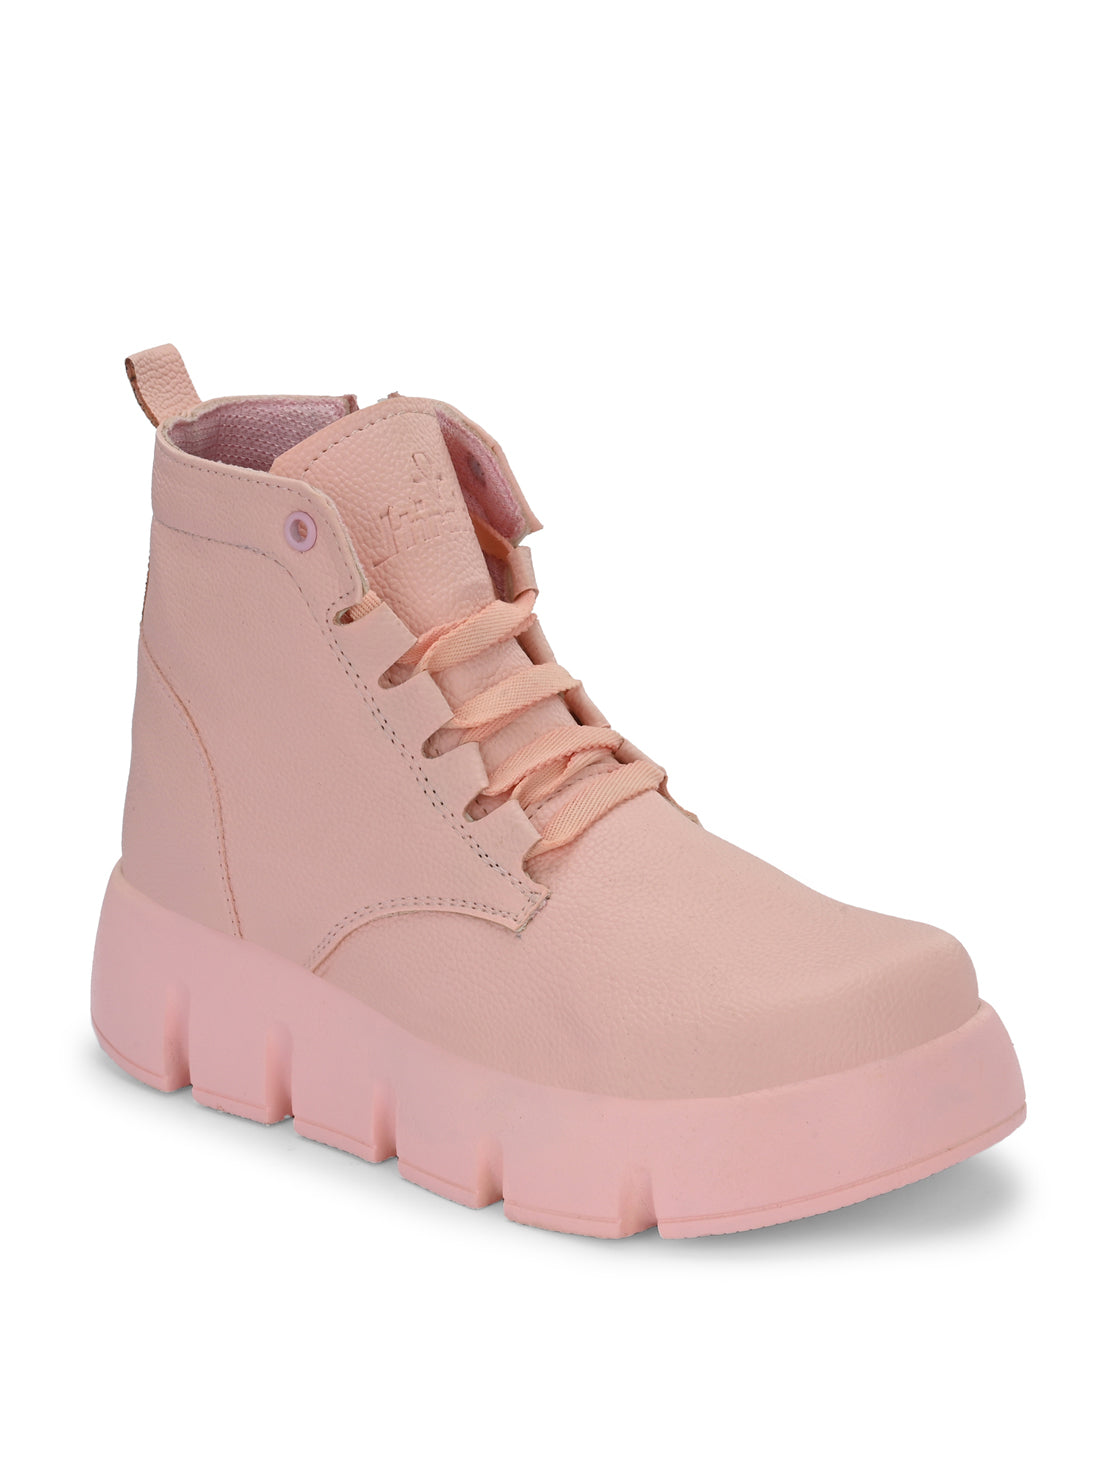 Hirolas® Women Pink Chunky Casual Lace-Up Ankle HighBoots (HRLWF18PNK)